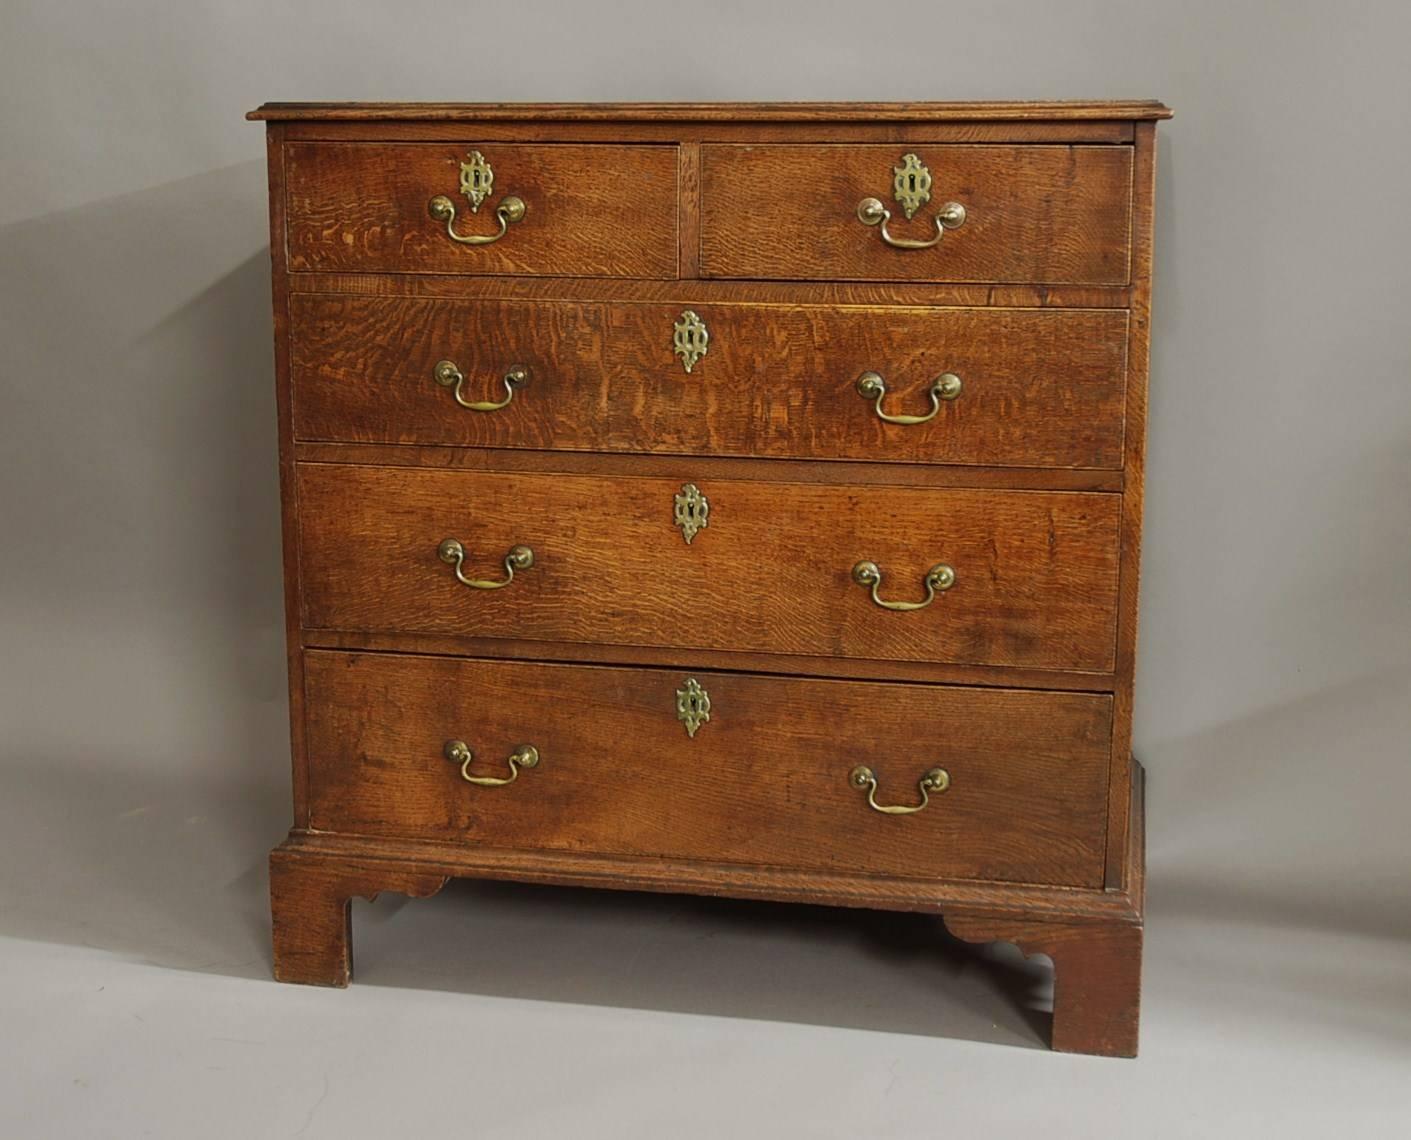 A late 18th century oak chest of drawers of fine patina.

This chest of drawers consists of a solid oak top with a moulded edge.

This leads down to the drawers, the configuration being two short over three long, each drawer has an oak front